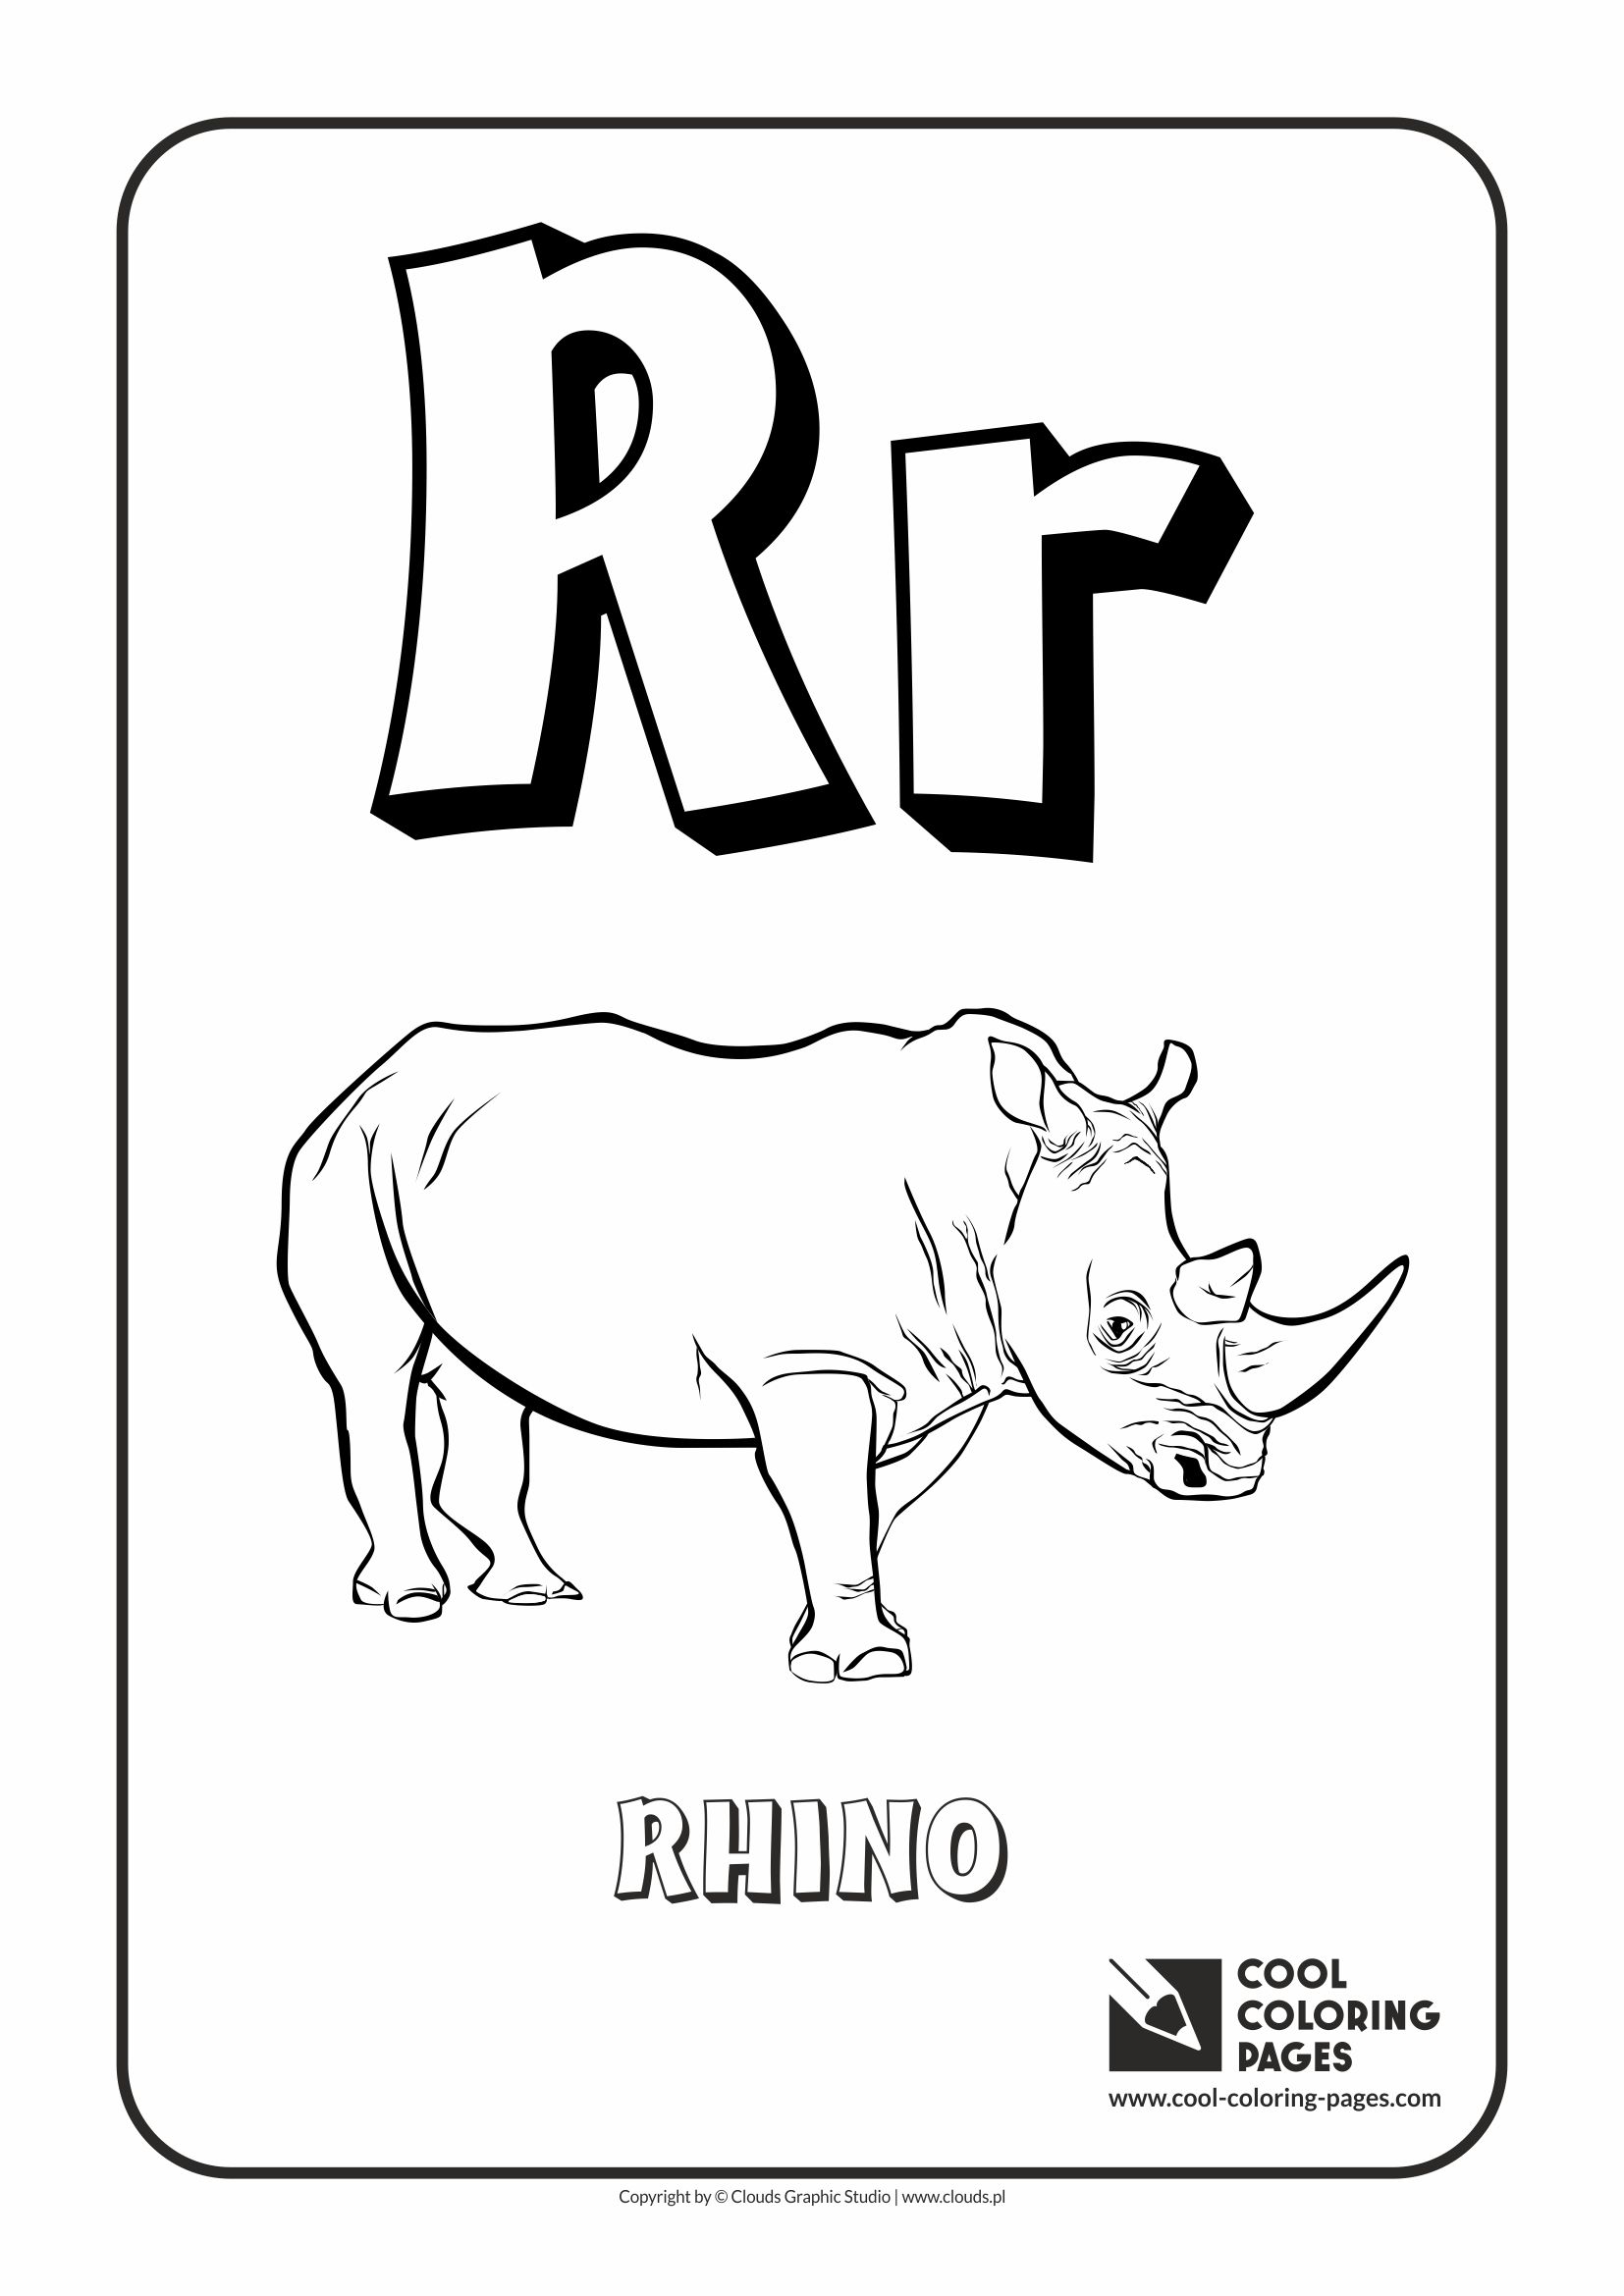 Cool coloring pages letter r